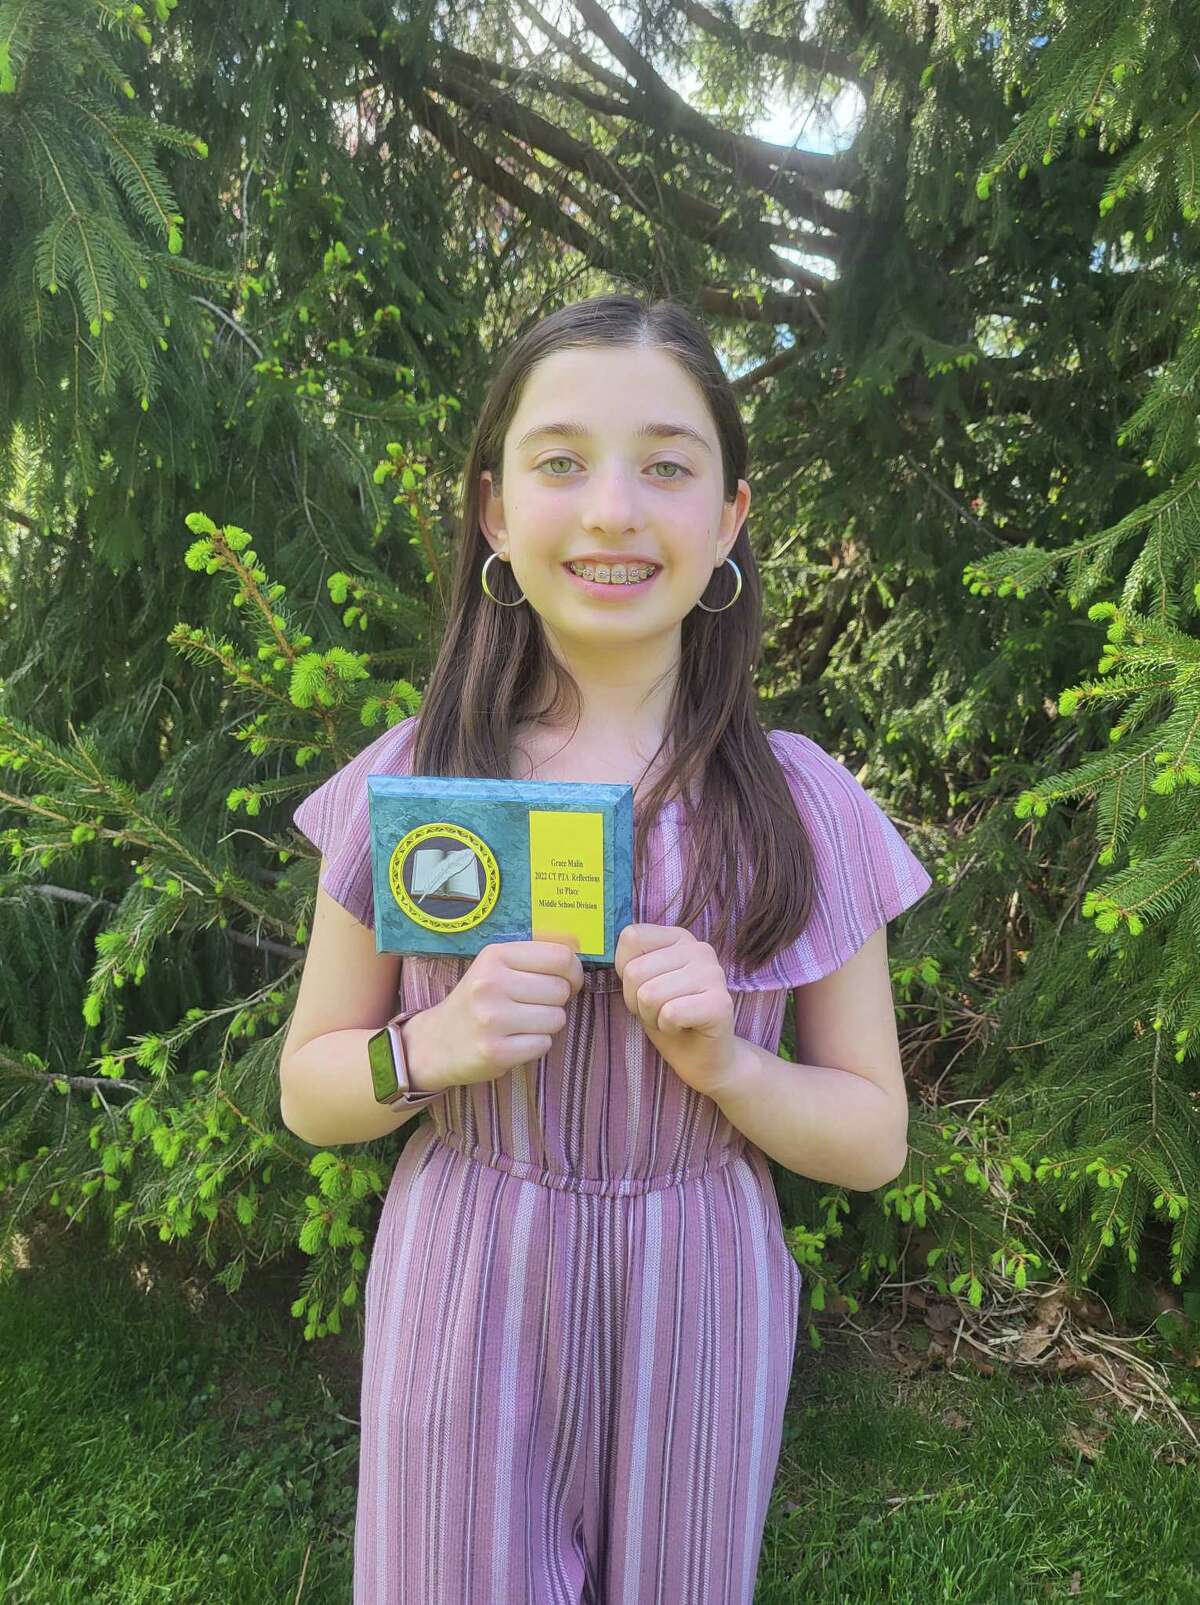 Grace Malin, a sixth grader at Hillcrest Middle School, was recognized by the National PTA's Reflections contest, which honors creative expression by elementary, middle and high school students.